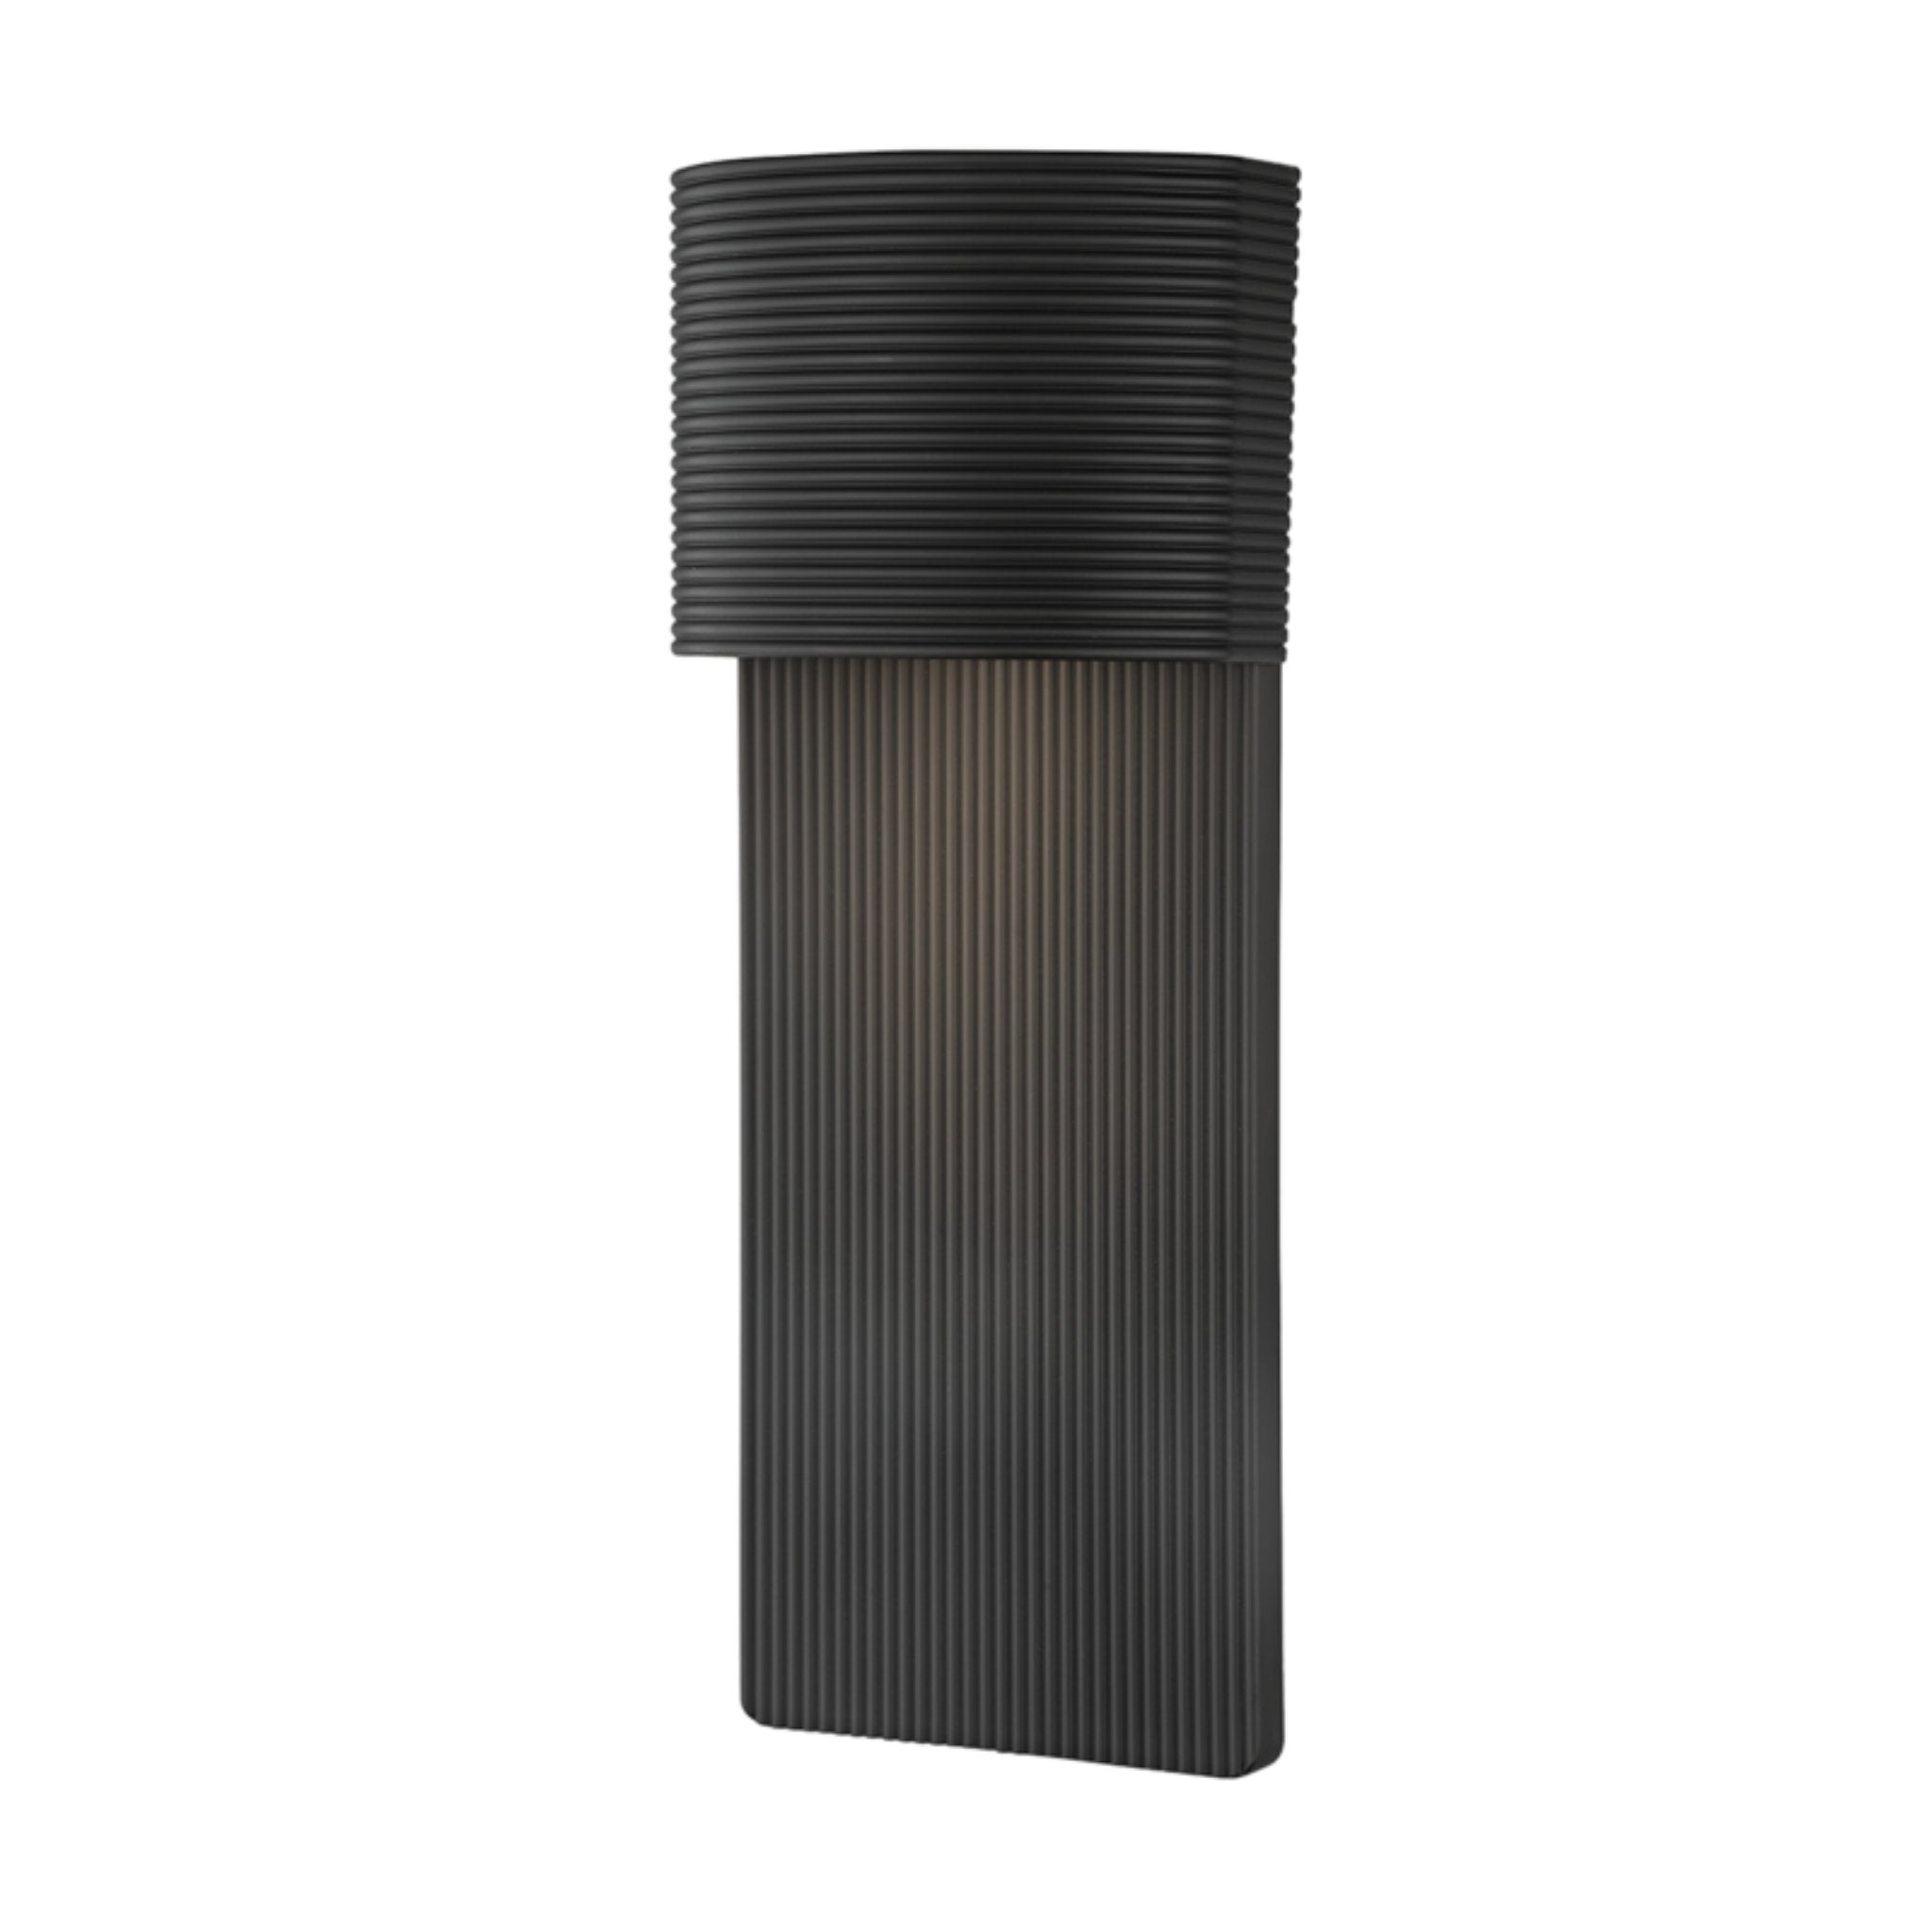 Tempe 1 Light Wall Sconce in Soft Black